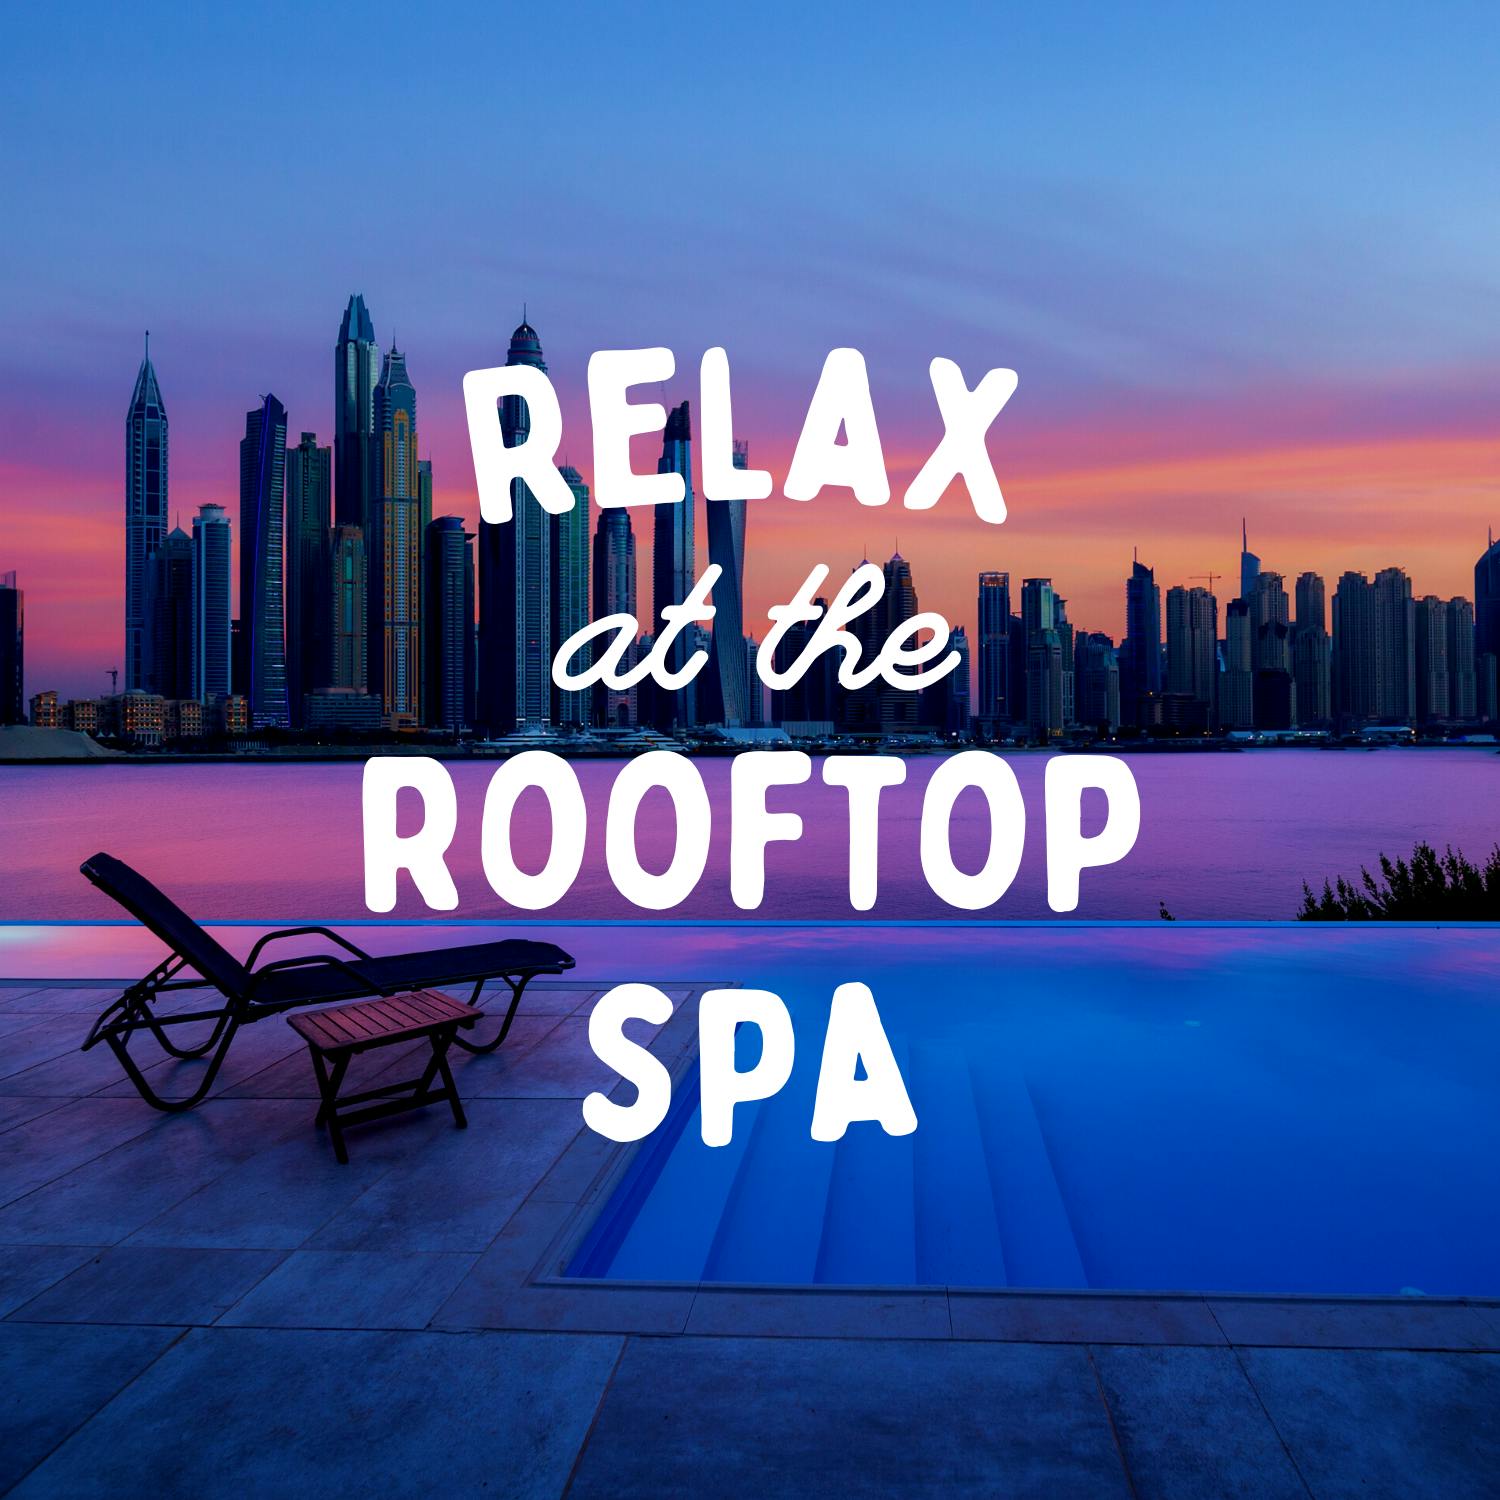 Relax at the Rooftop Spa